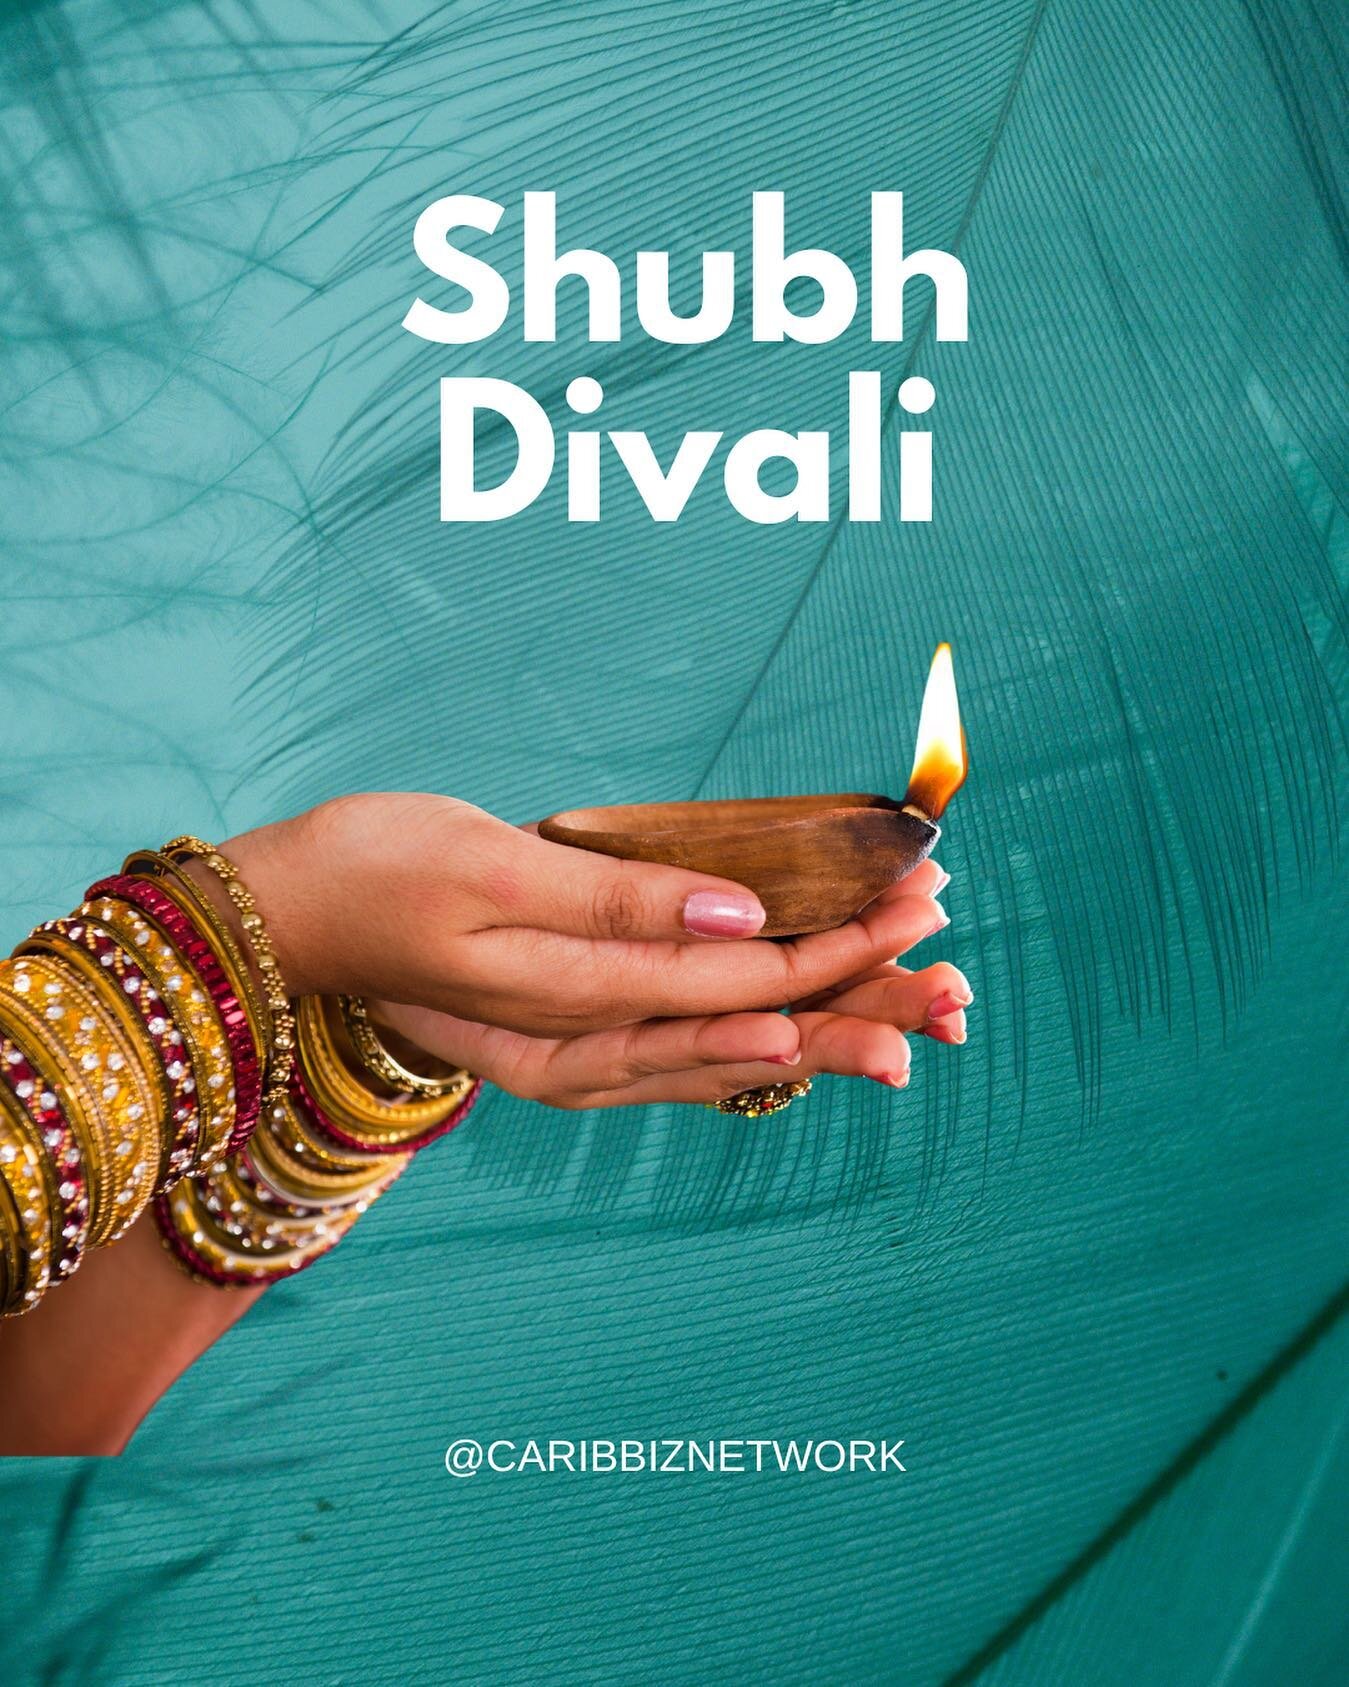 #CBNCelebrates : Happy Diwali to all those who celebrate this important Hindu festival. 

Here are 5 Key Facts About Diwali:

1) Diwali is an important religious festival originating in India. People often think of Diwali as a Hindu festival, but it 